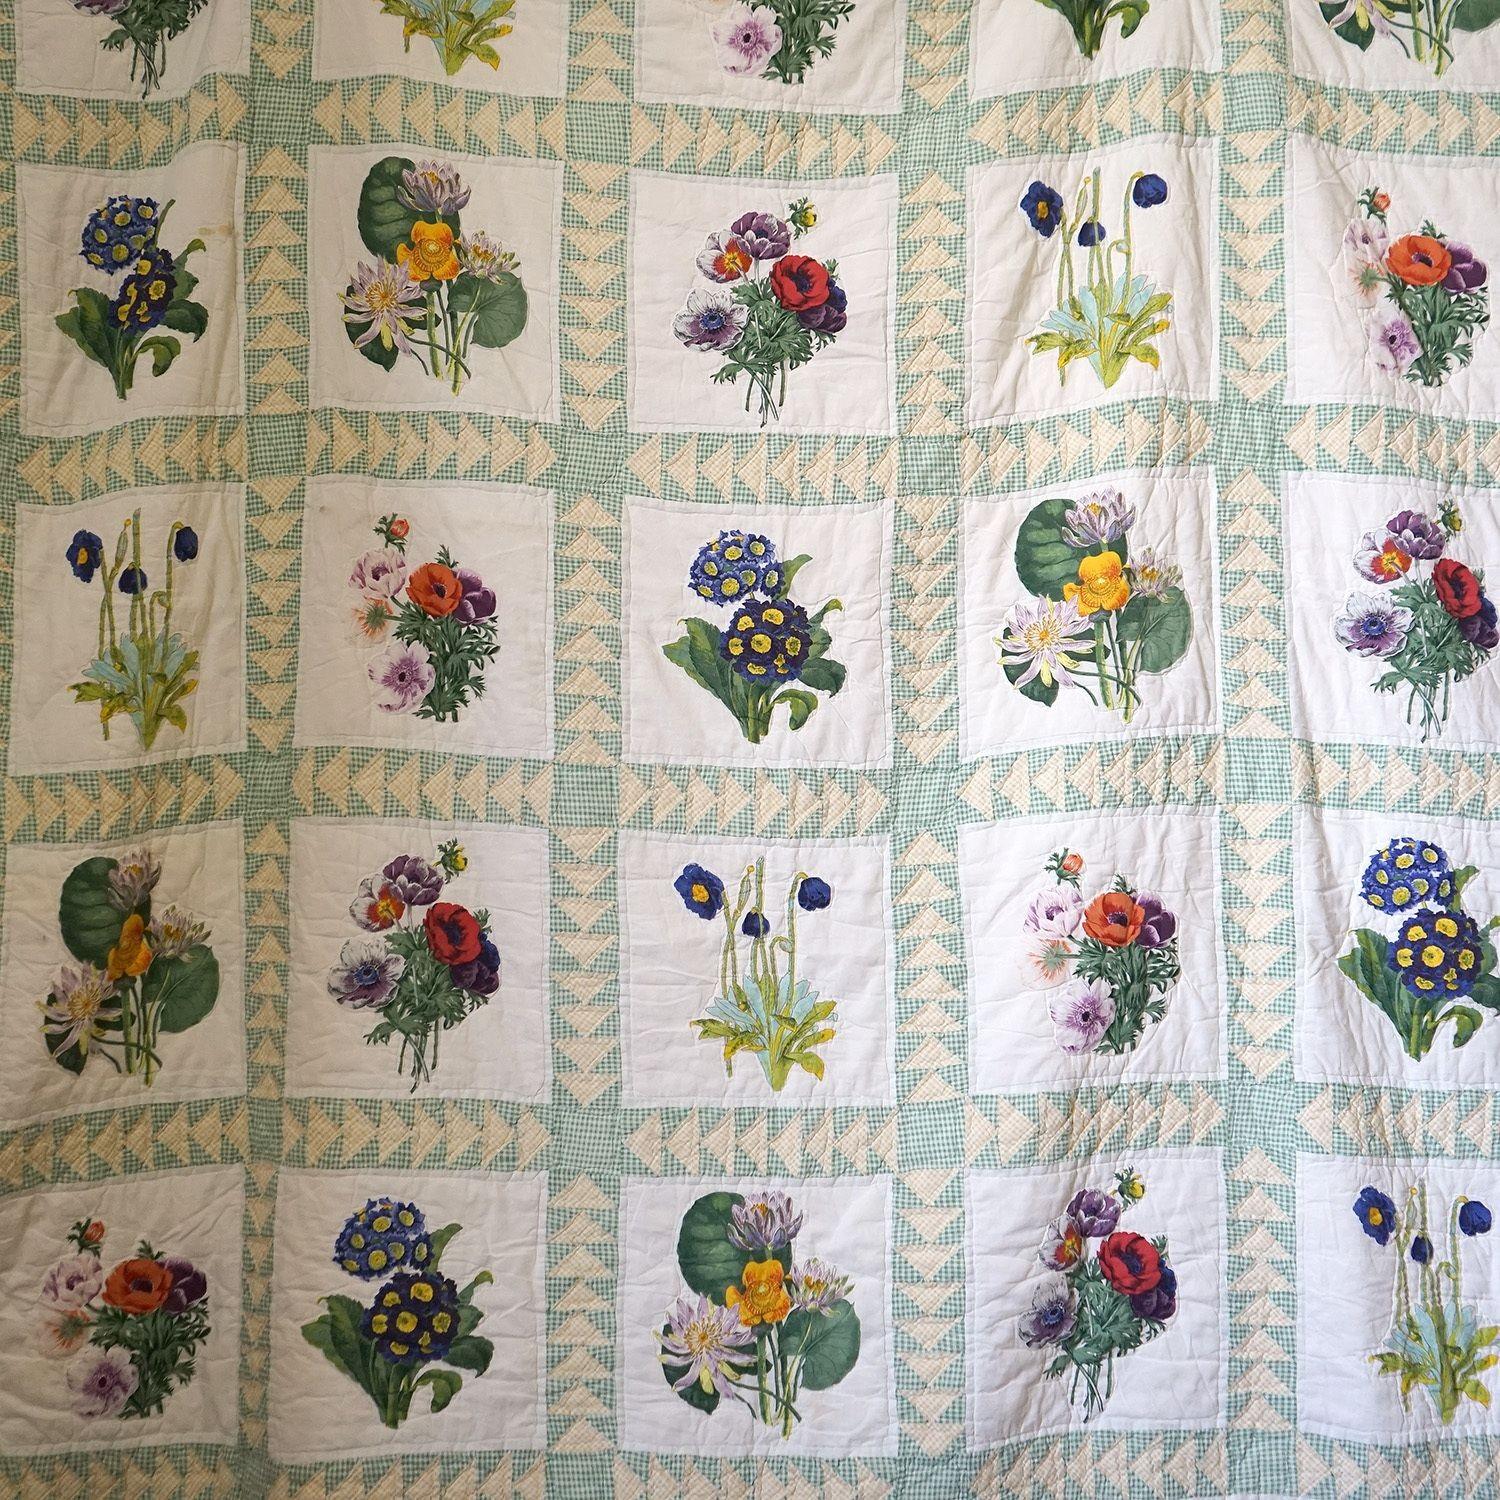 Cotton Large Vintage American Hand-Stitched Floral Patchwork Quilt, 20th Century